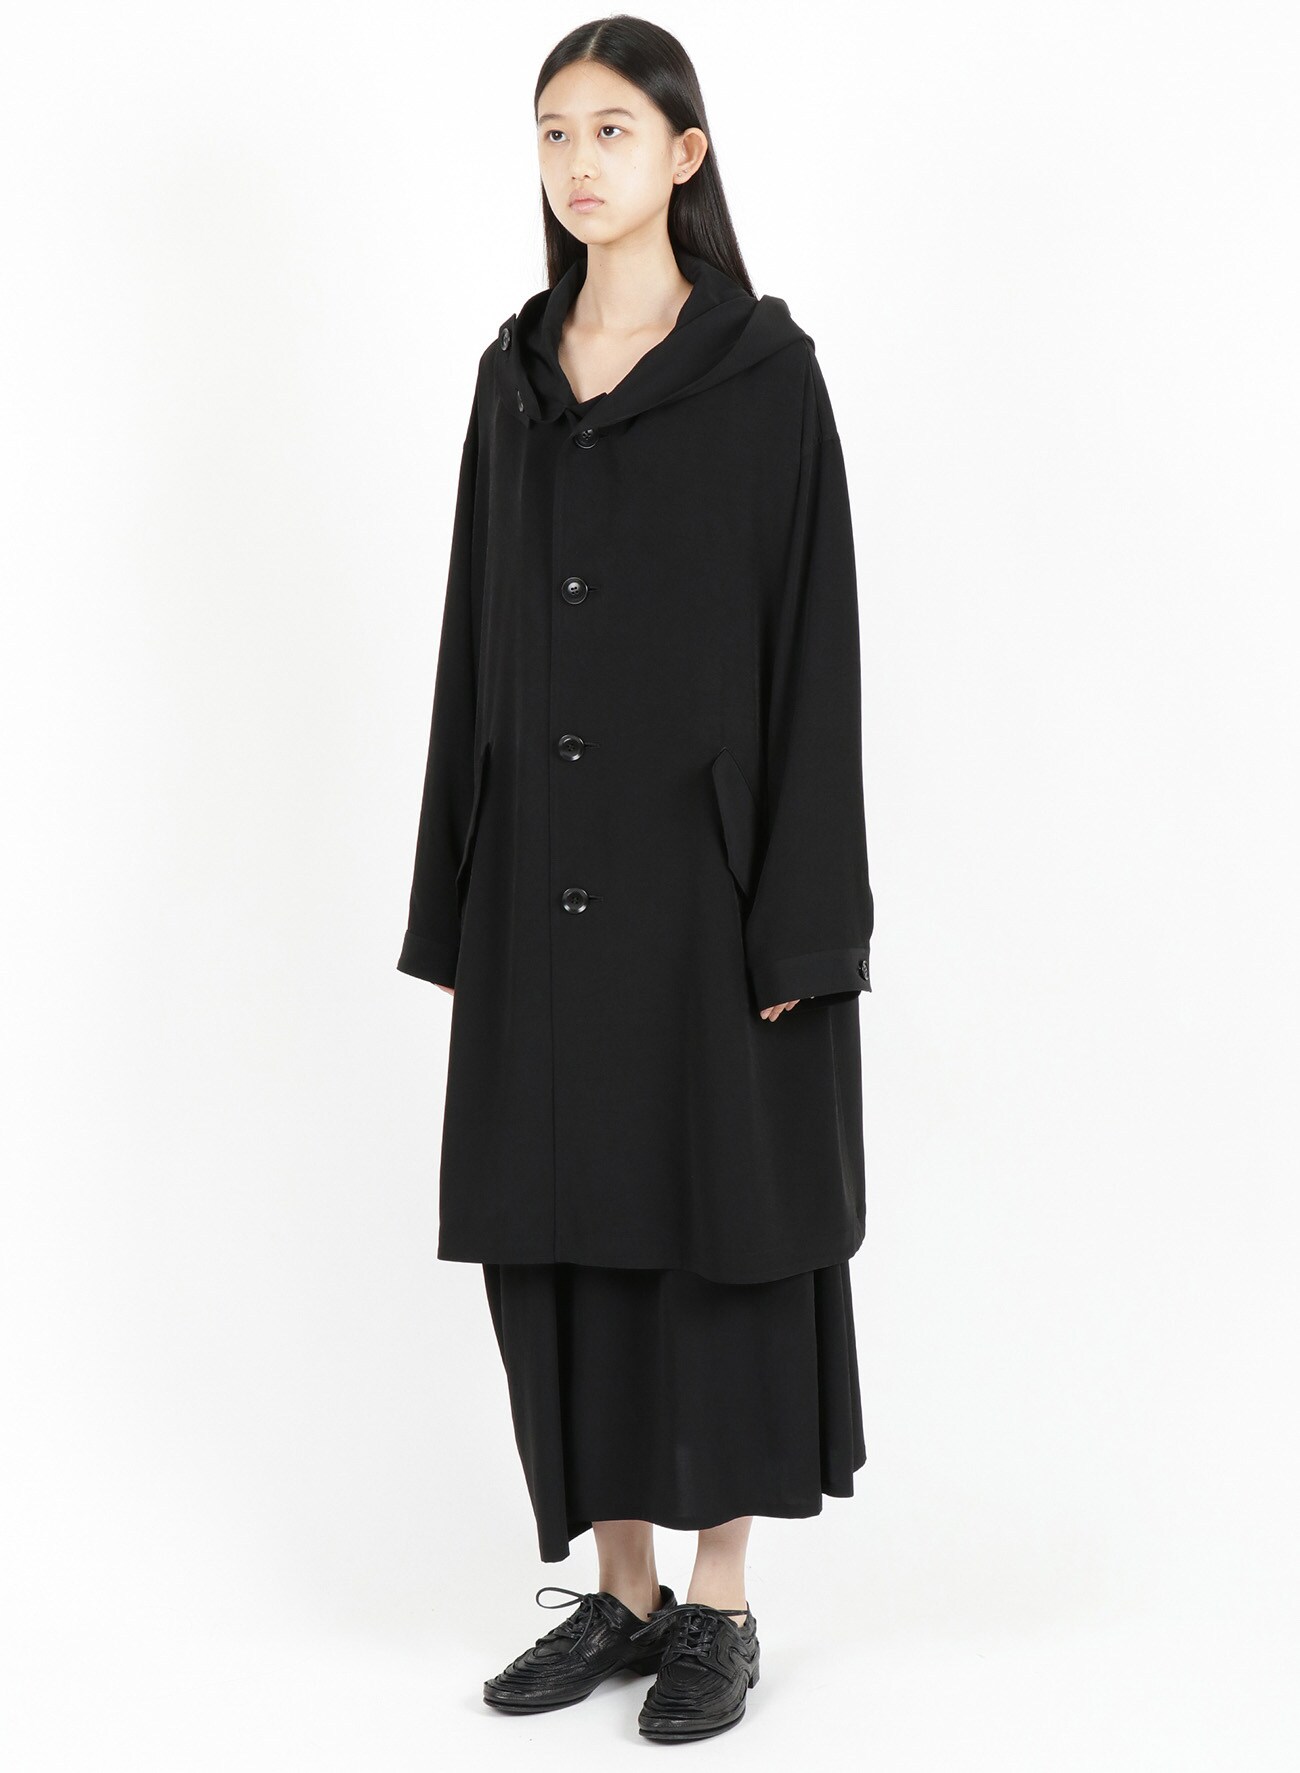 TRIACETATE POLYESTER de CHINE HOODED COAT